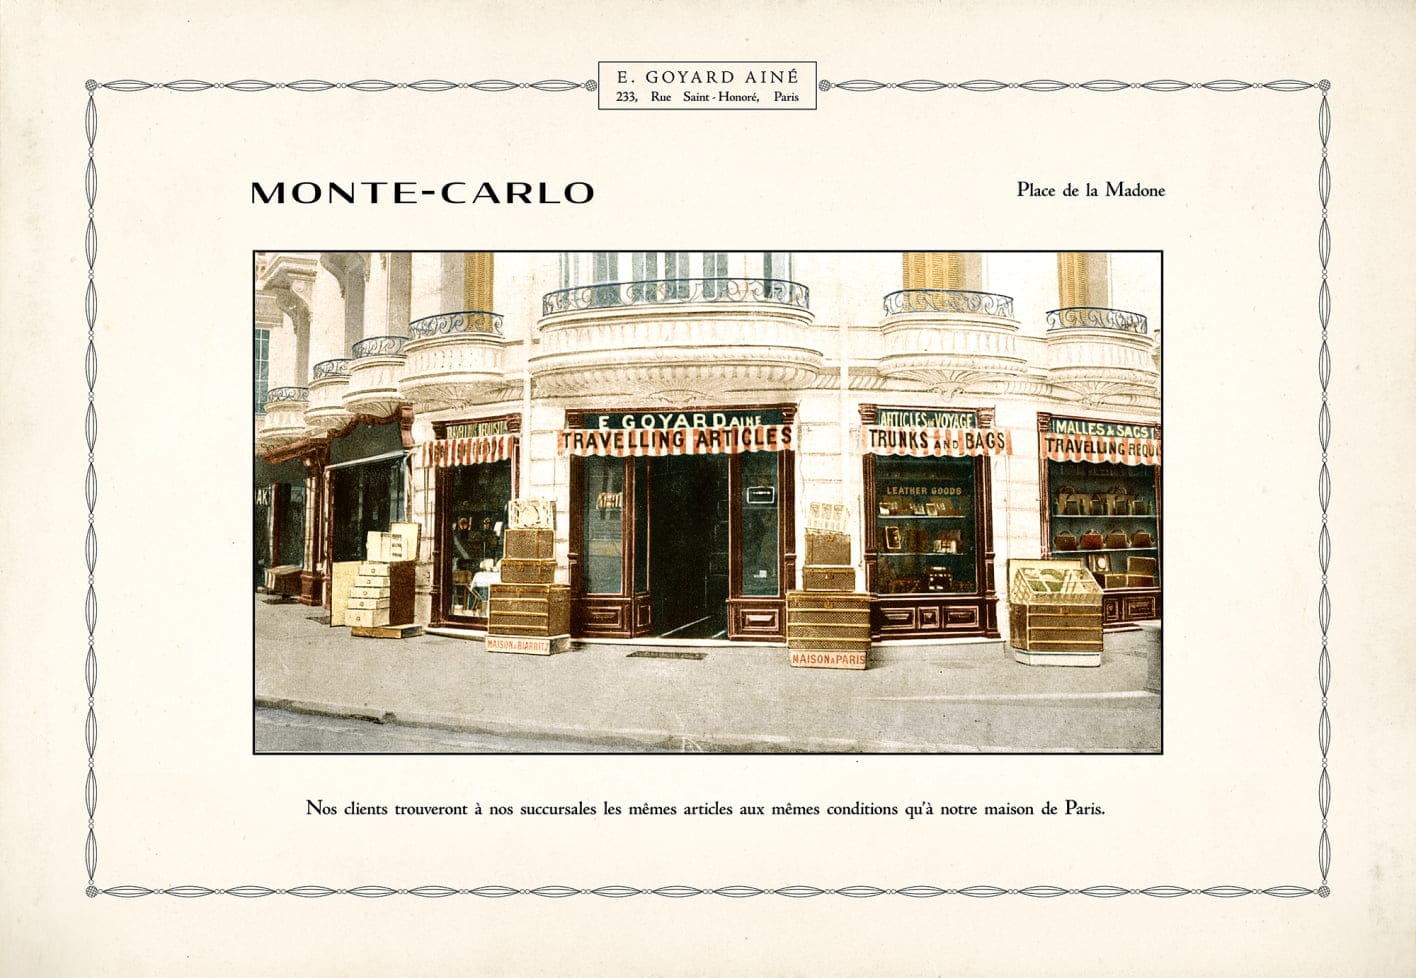 Historical image of the Goyard boutique in Monte-Carlo